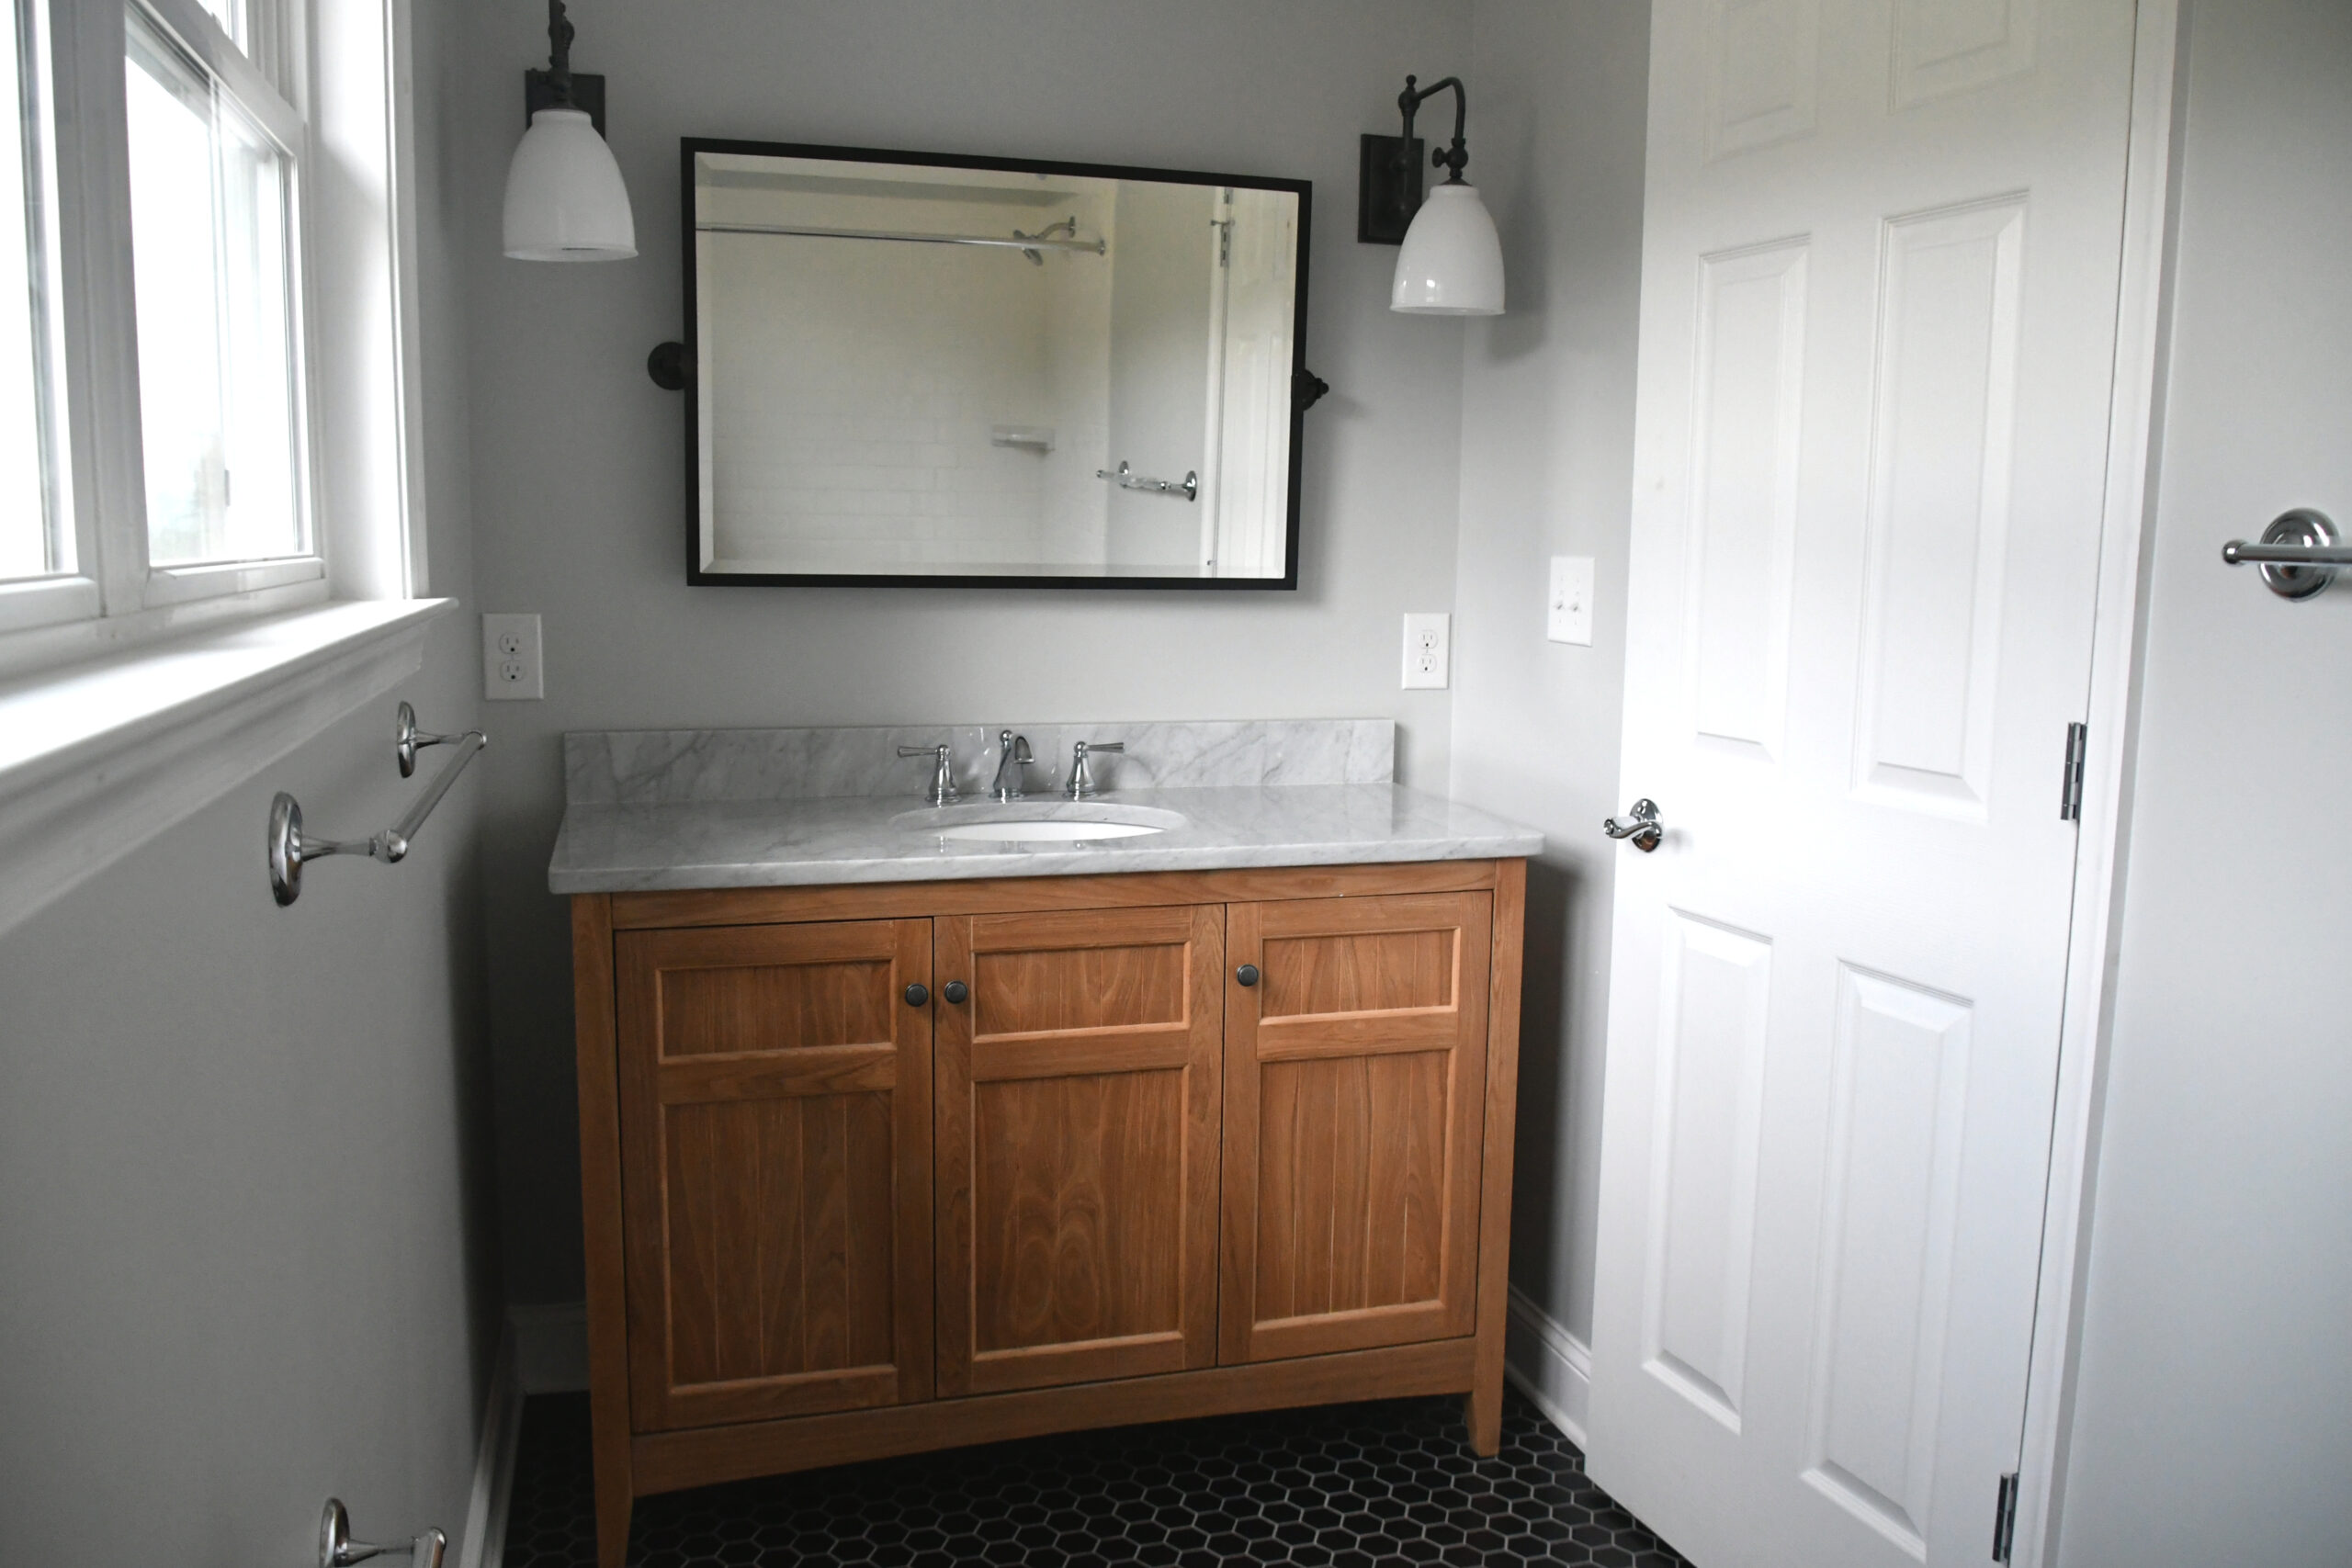 Tips for Selecting the Perfect Bathroom Vanity